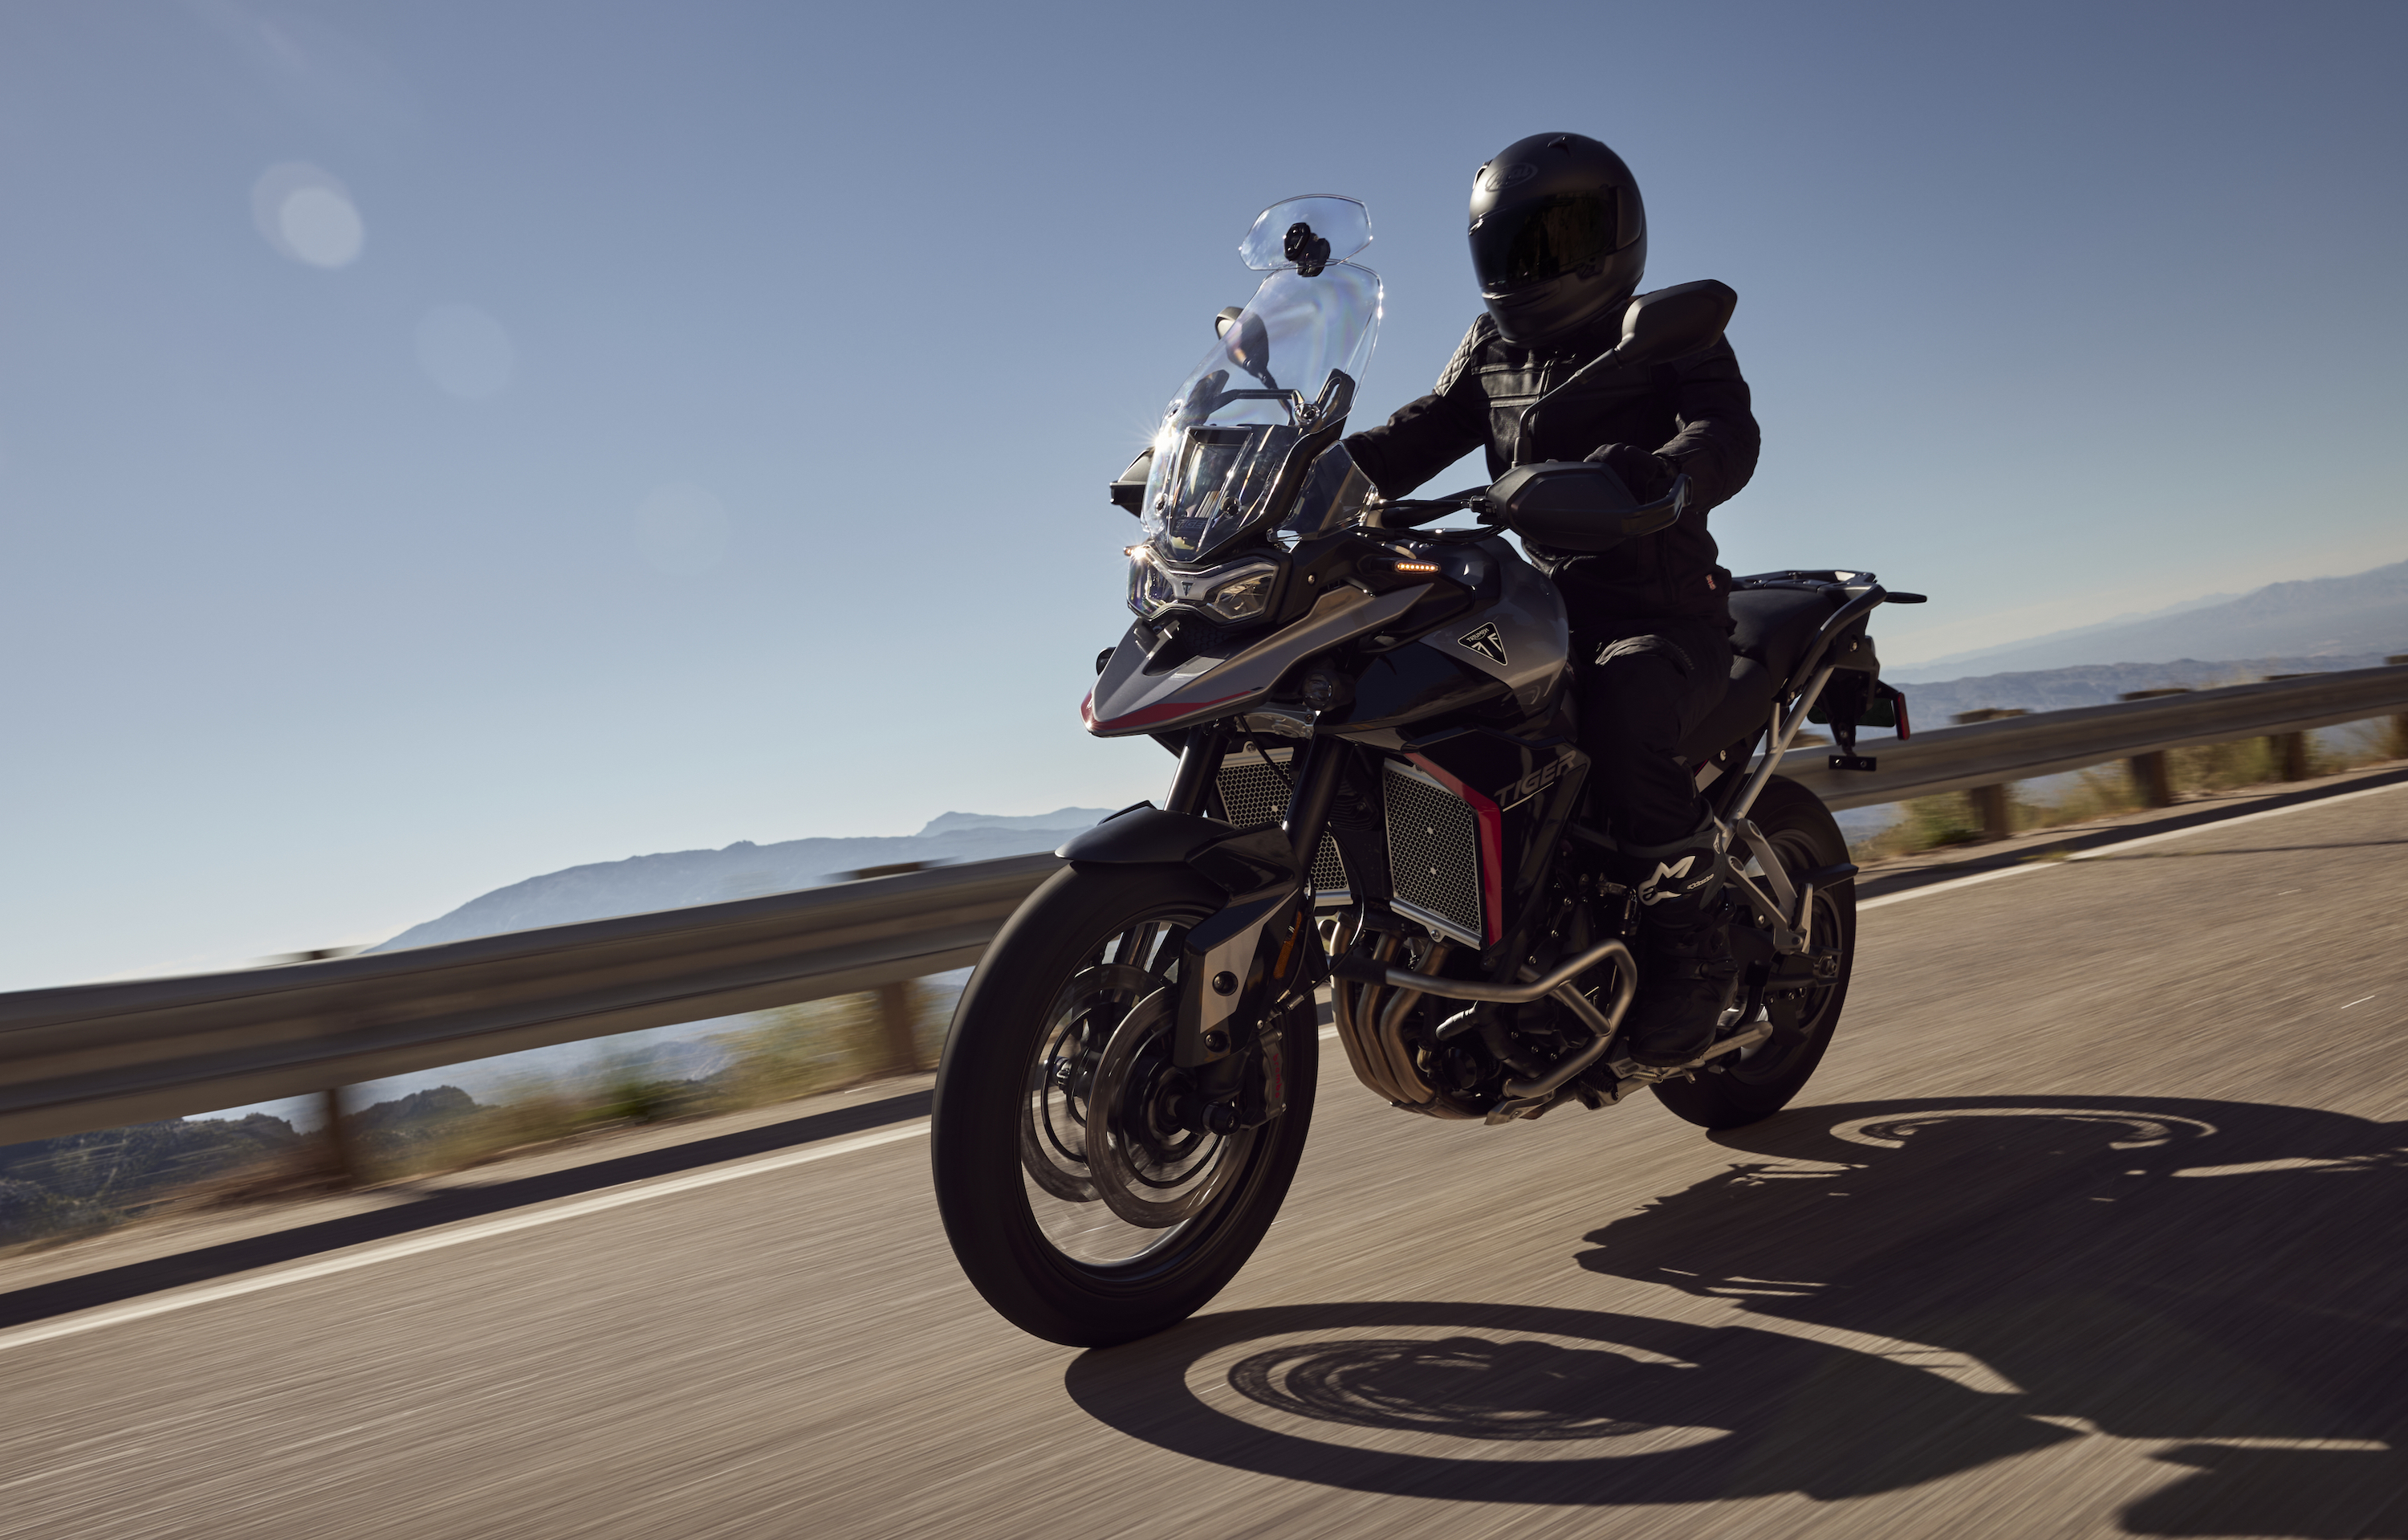 Top 10 Best Motorcycle Cruise Controls in 2023 Reviews 